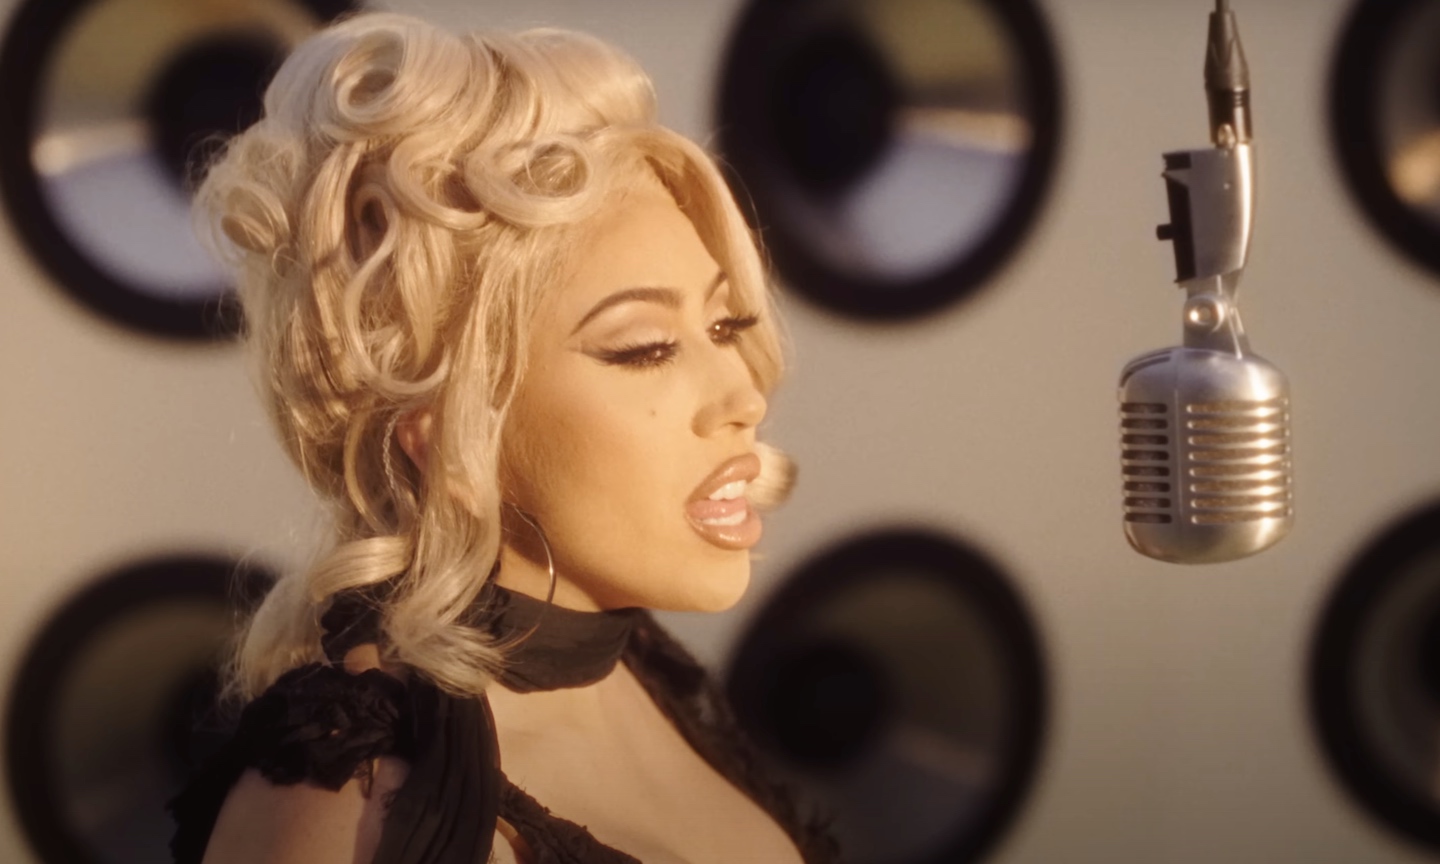 Kali Uchis Shares Live Performance Video Of 'Melting'